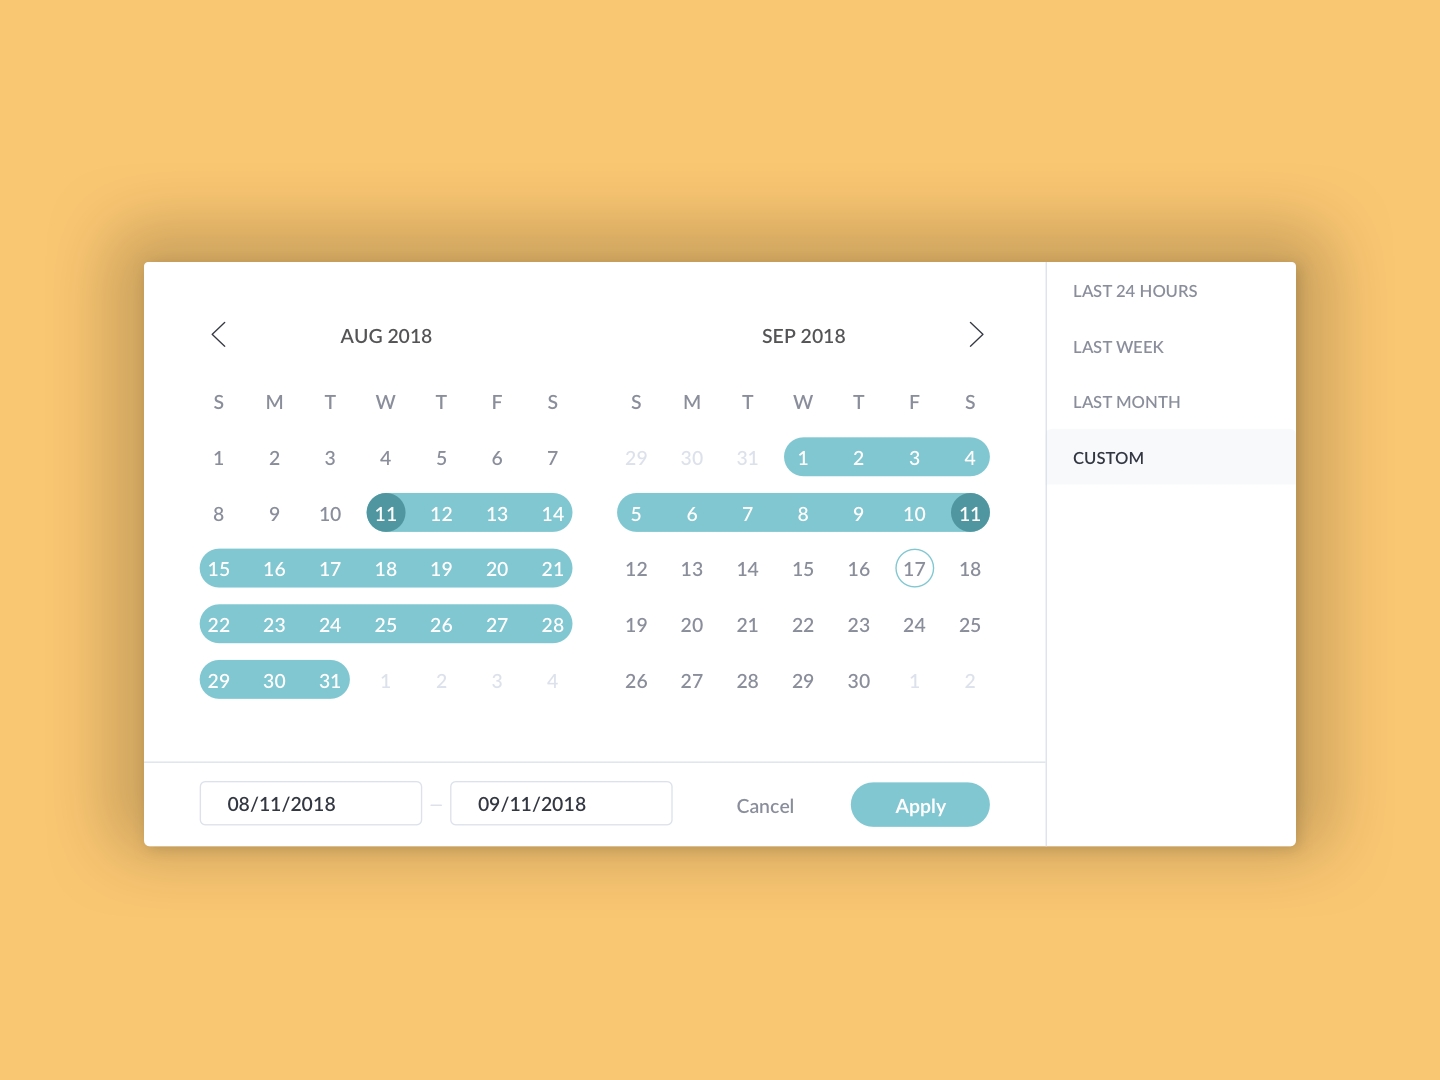 How To Design A Perfect Date Picker Control? - Ux Planet